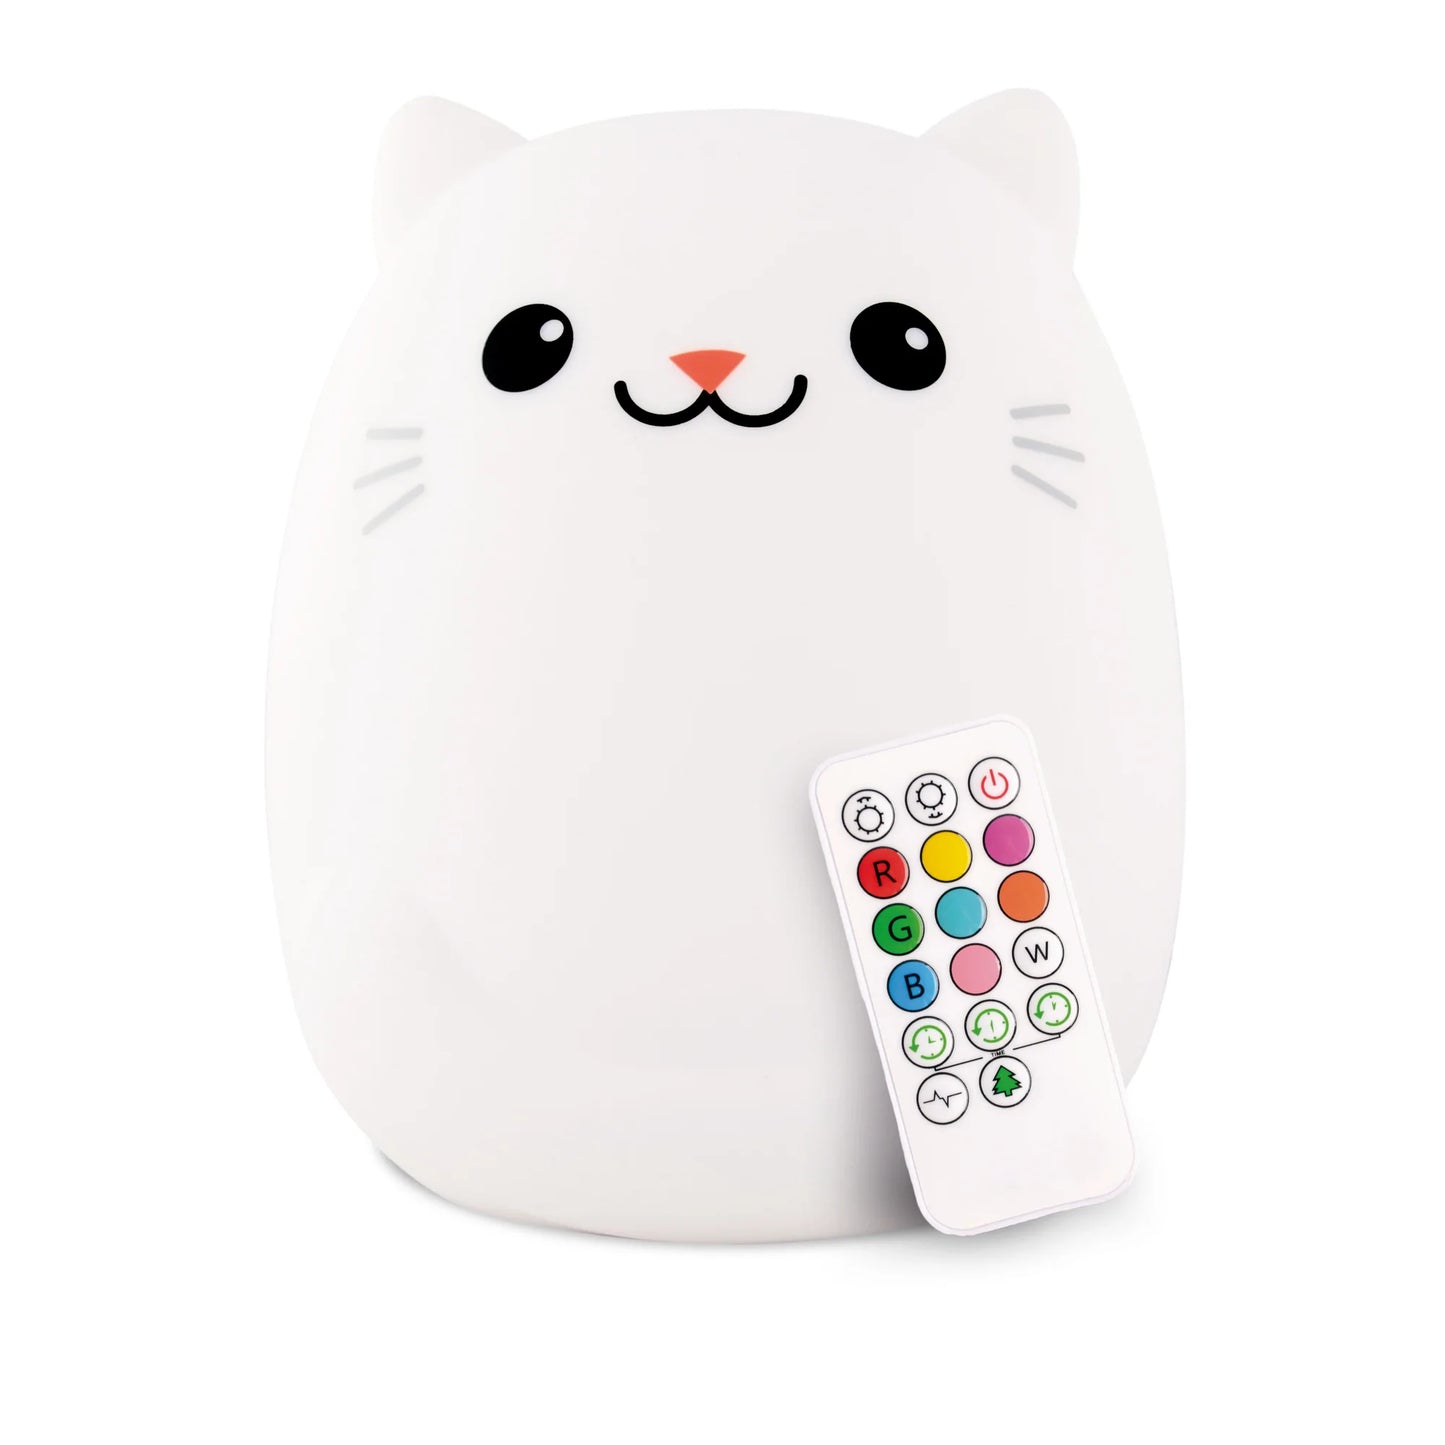 Round white silicon kitten that lights up on touch, or with remote (included in picture)